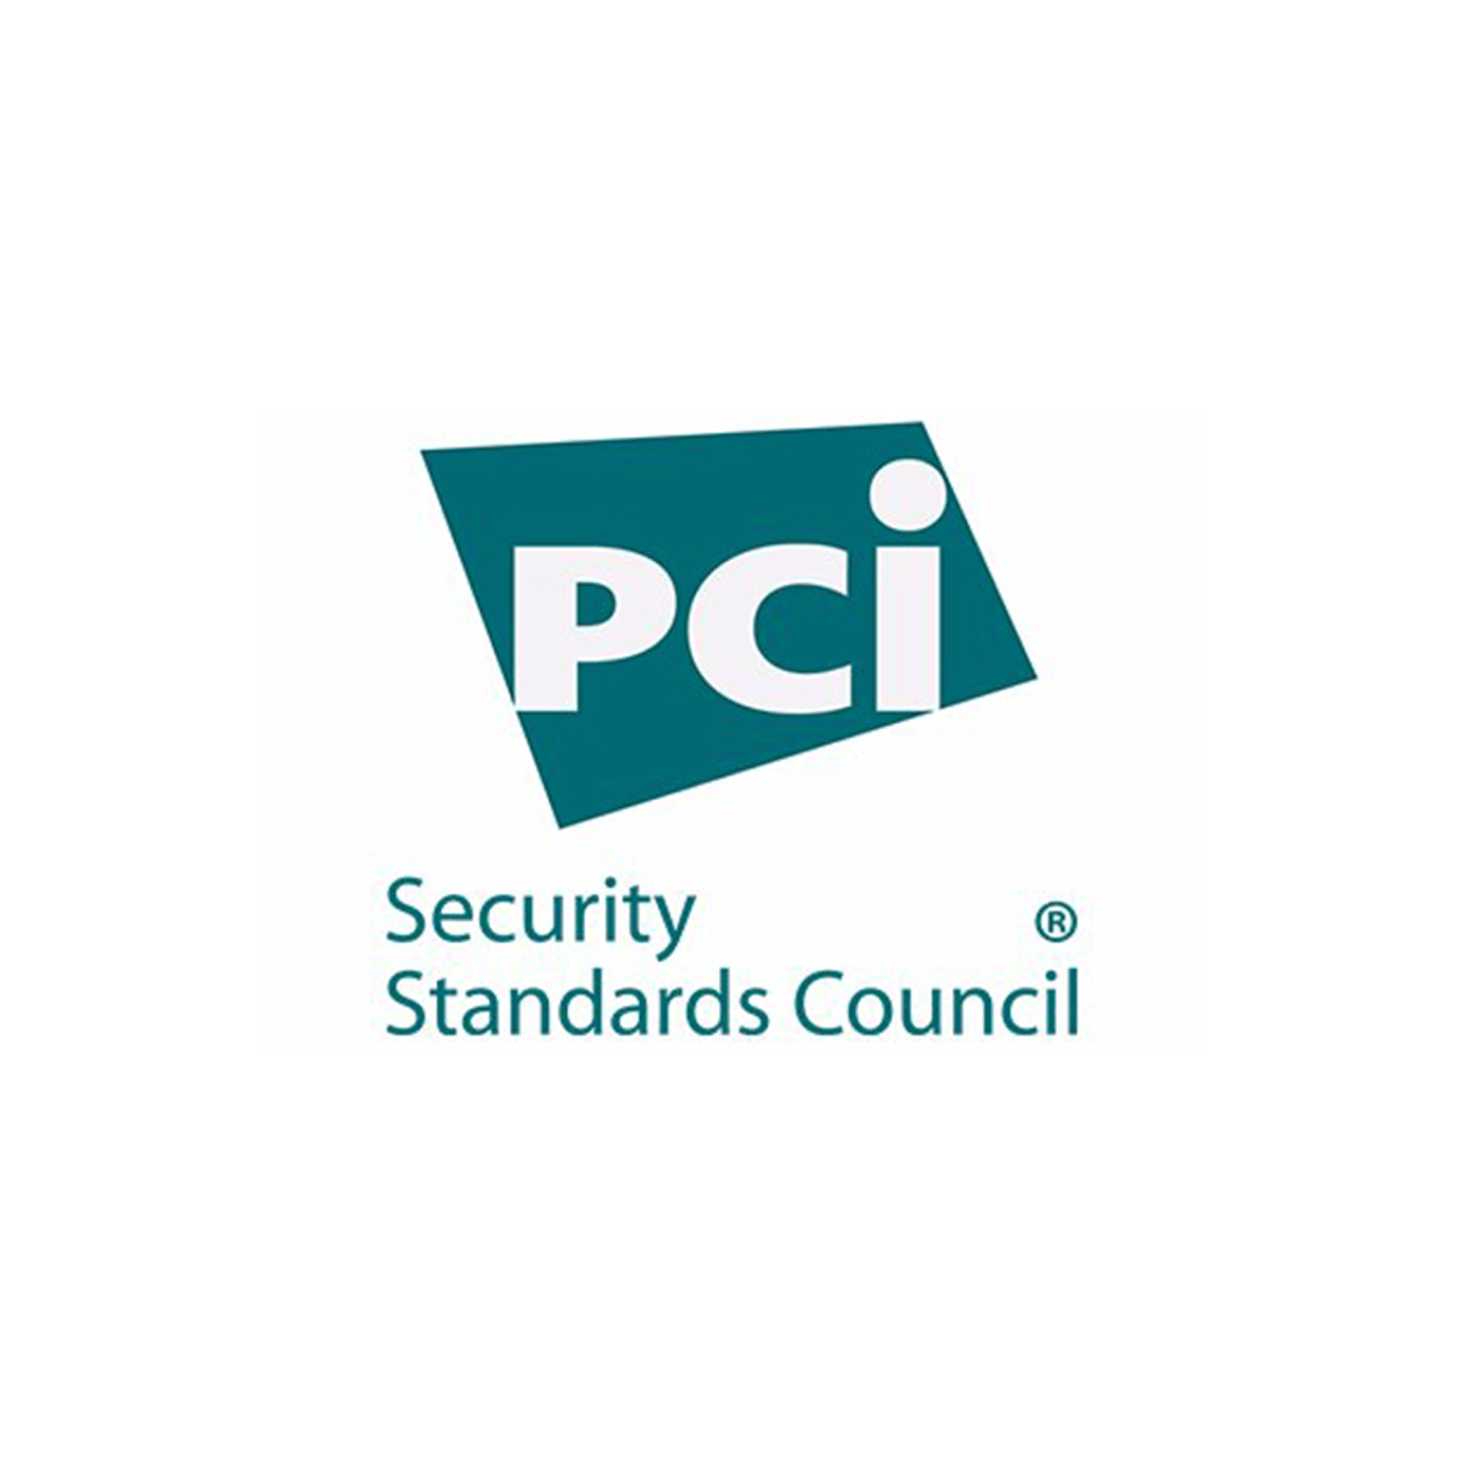 The logo of the PCI Security Standards Council.